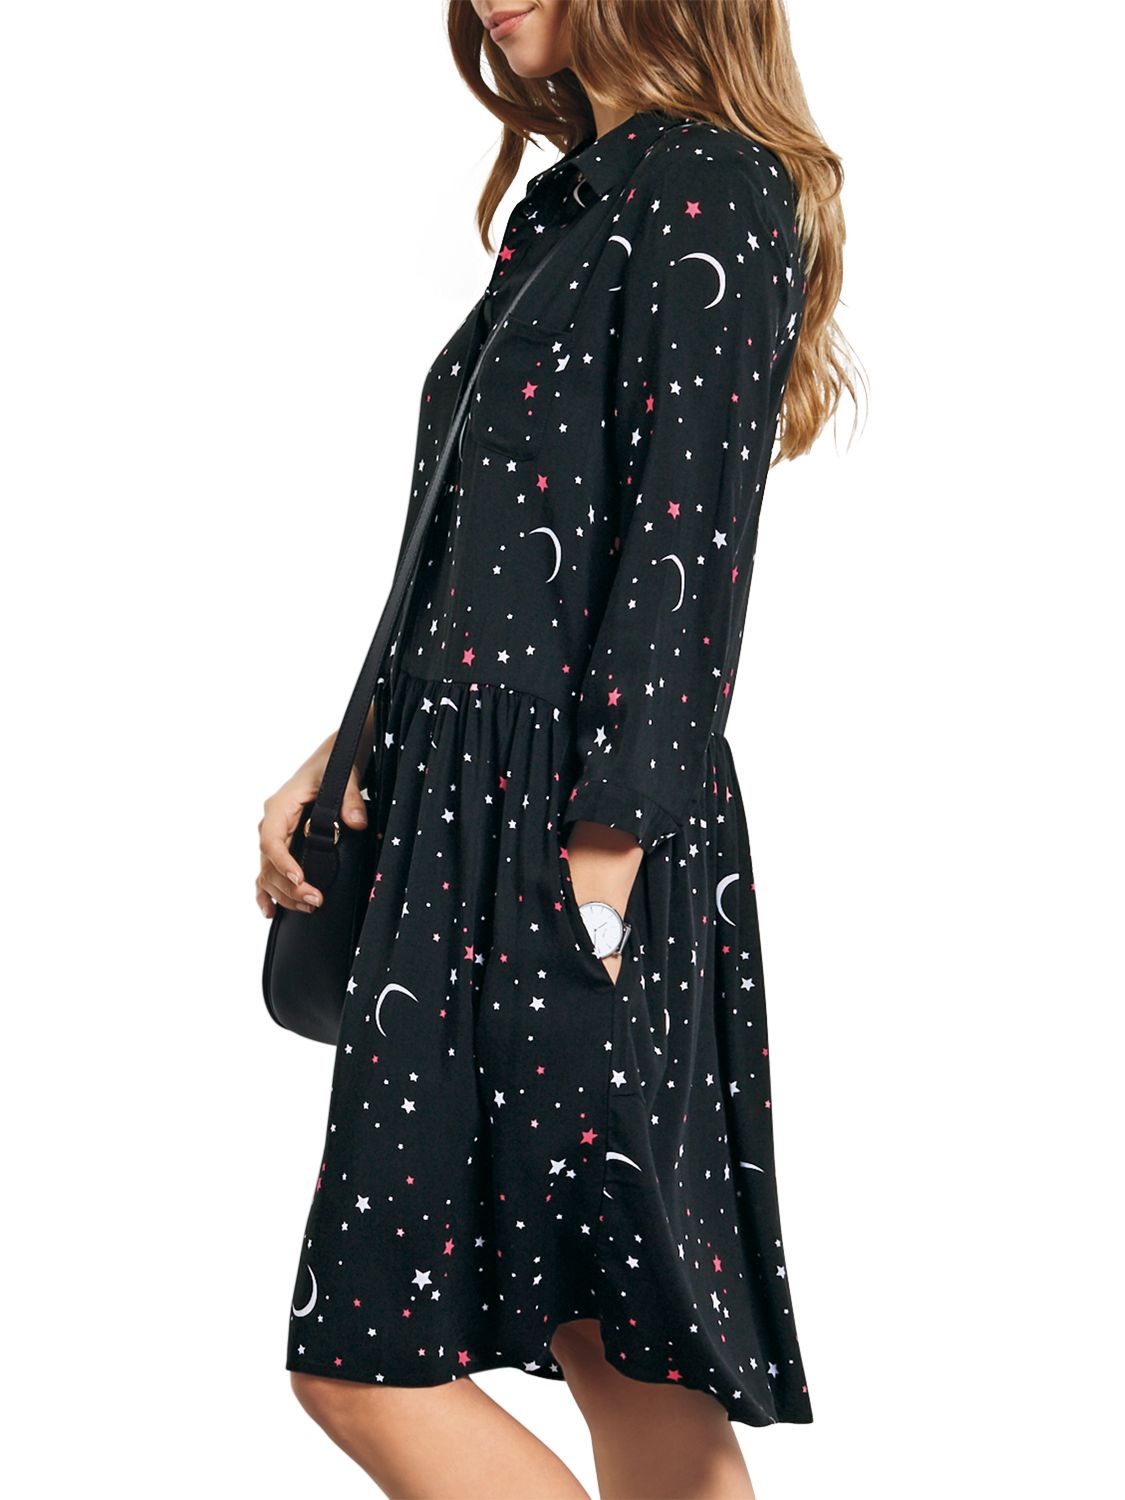 black dress with stars and moons